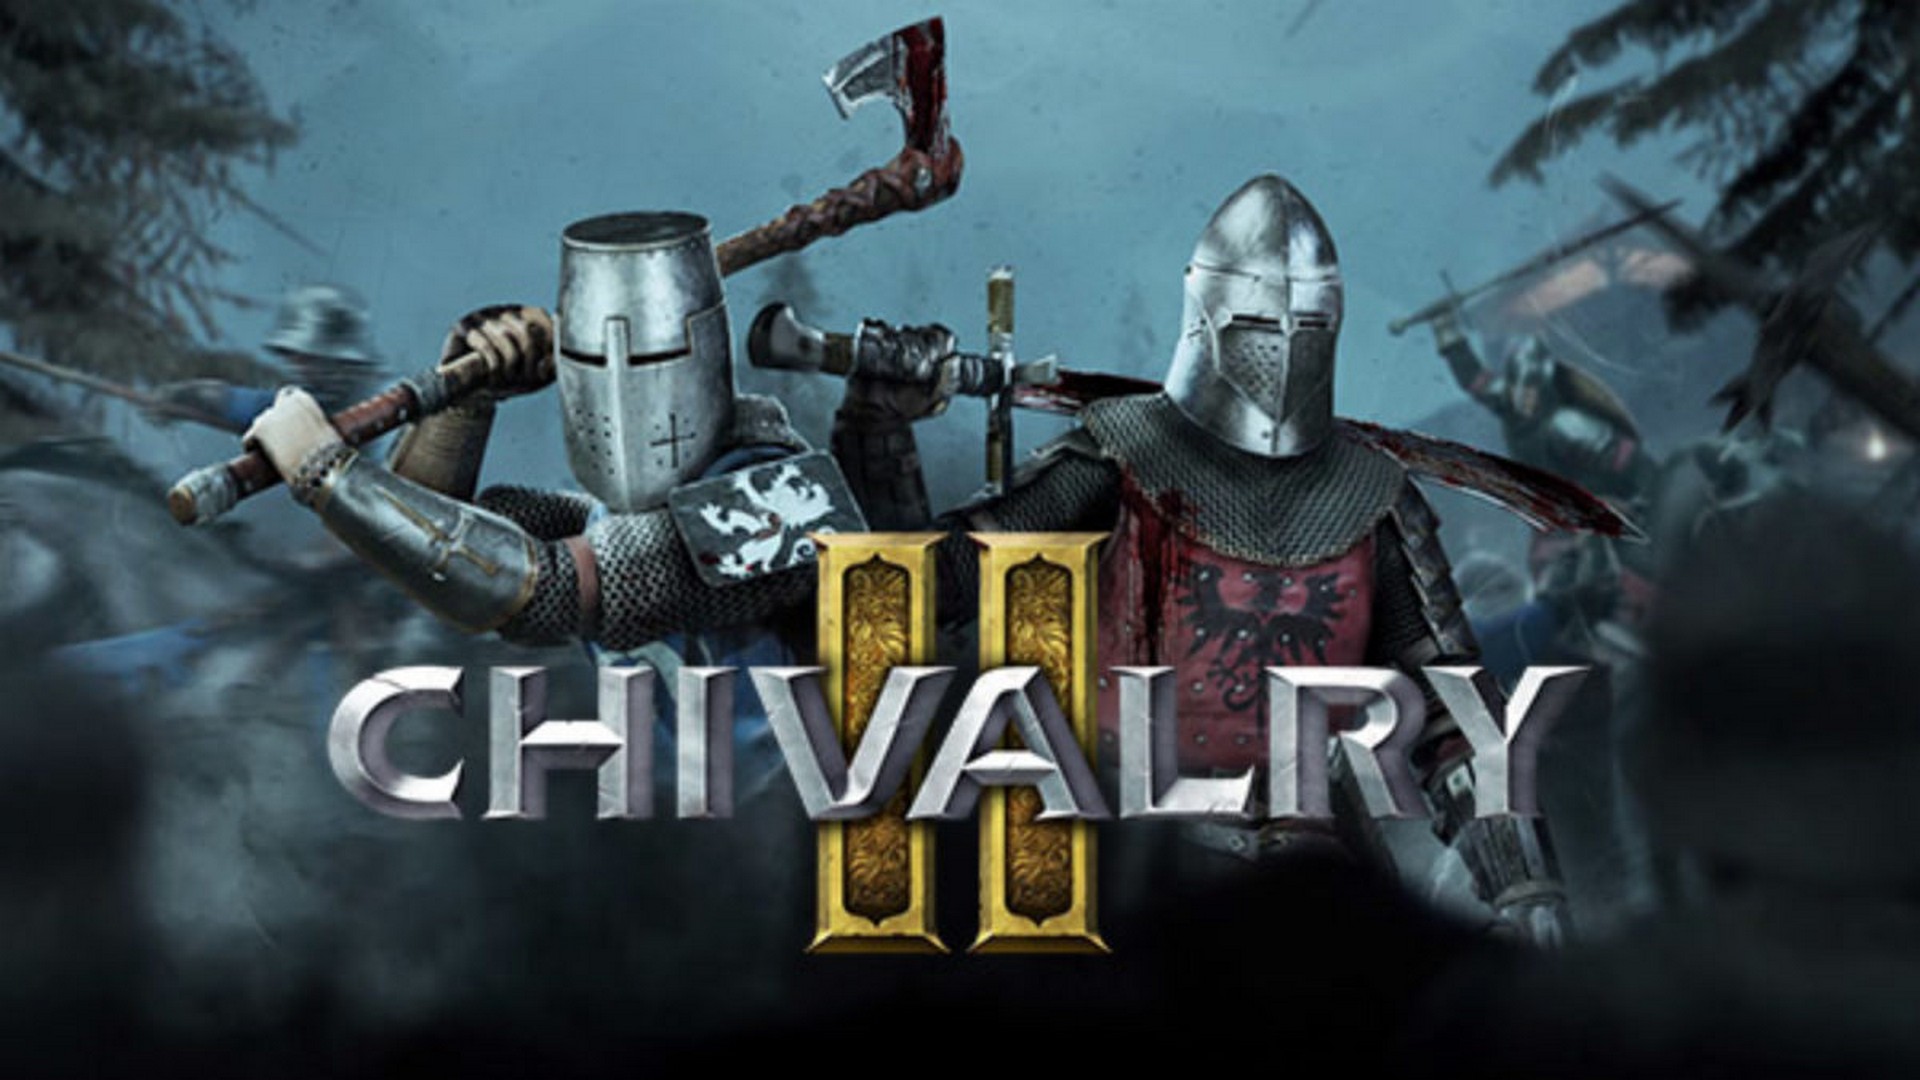 Chivalry 2 To Bring Genre-Defining, Epic-Scale Medieval Combat to Current and Next Generation Consoles with Cross-Play